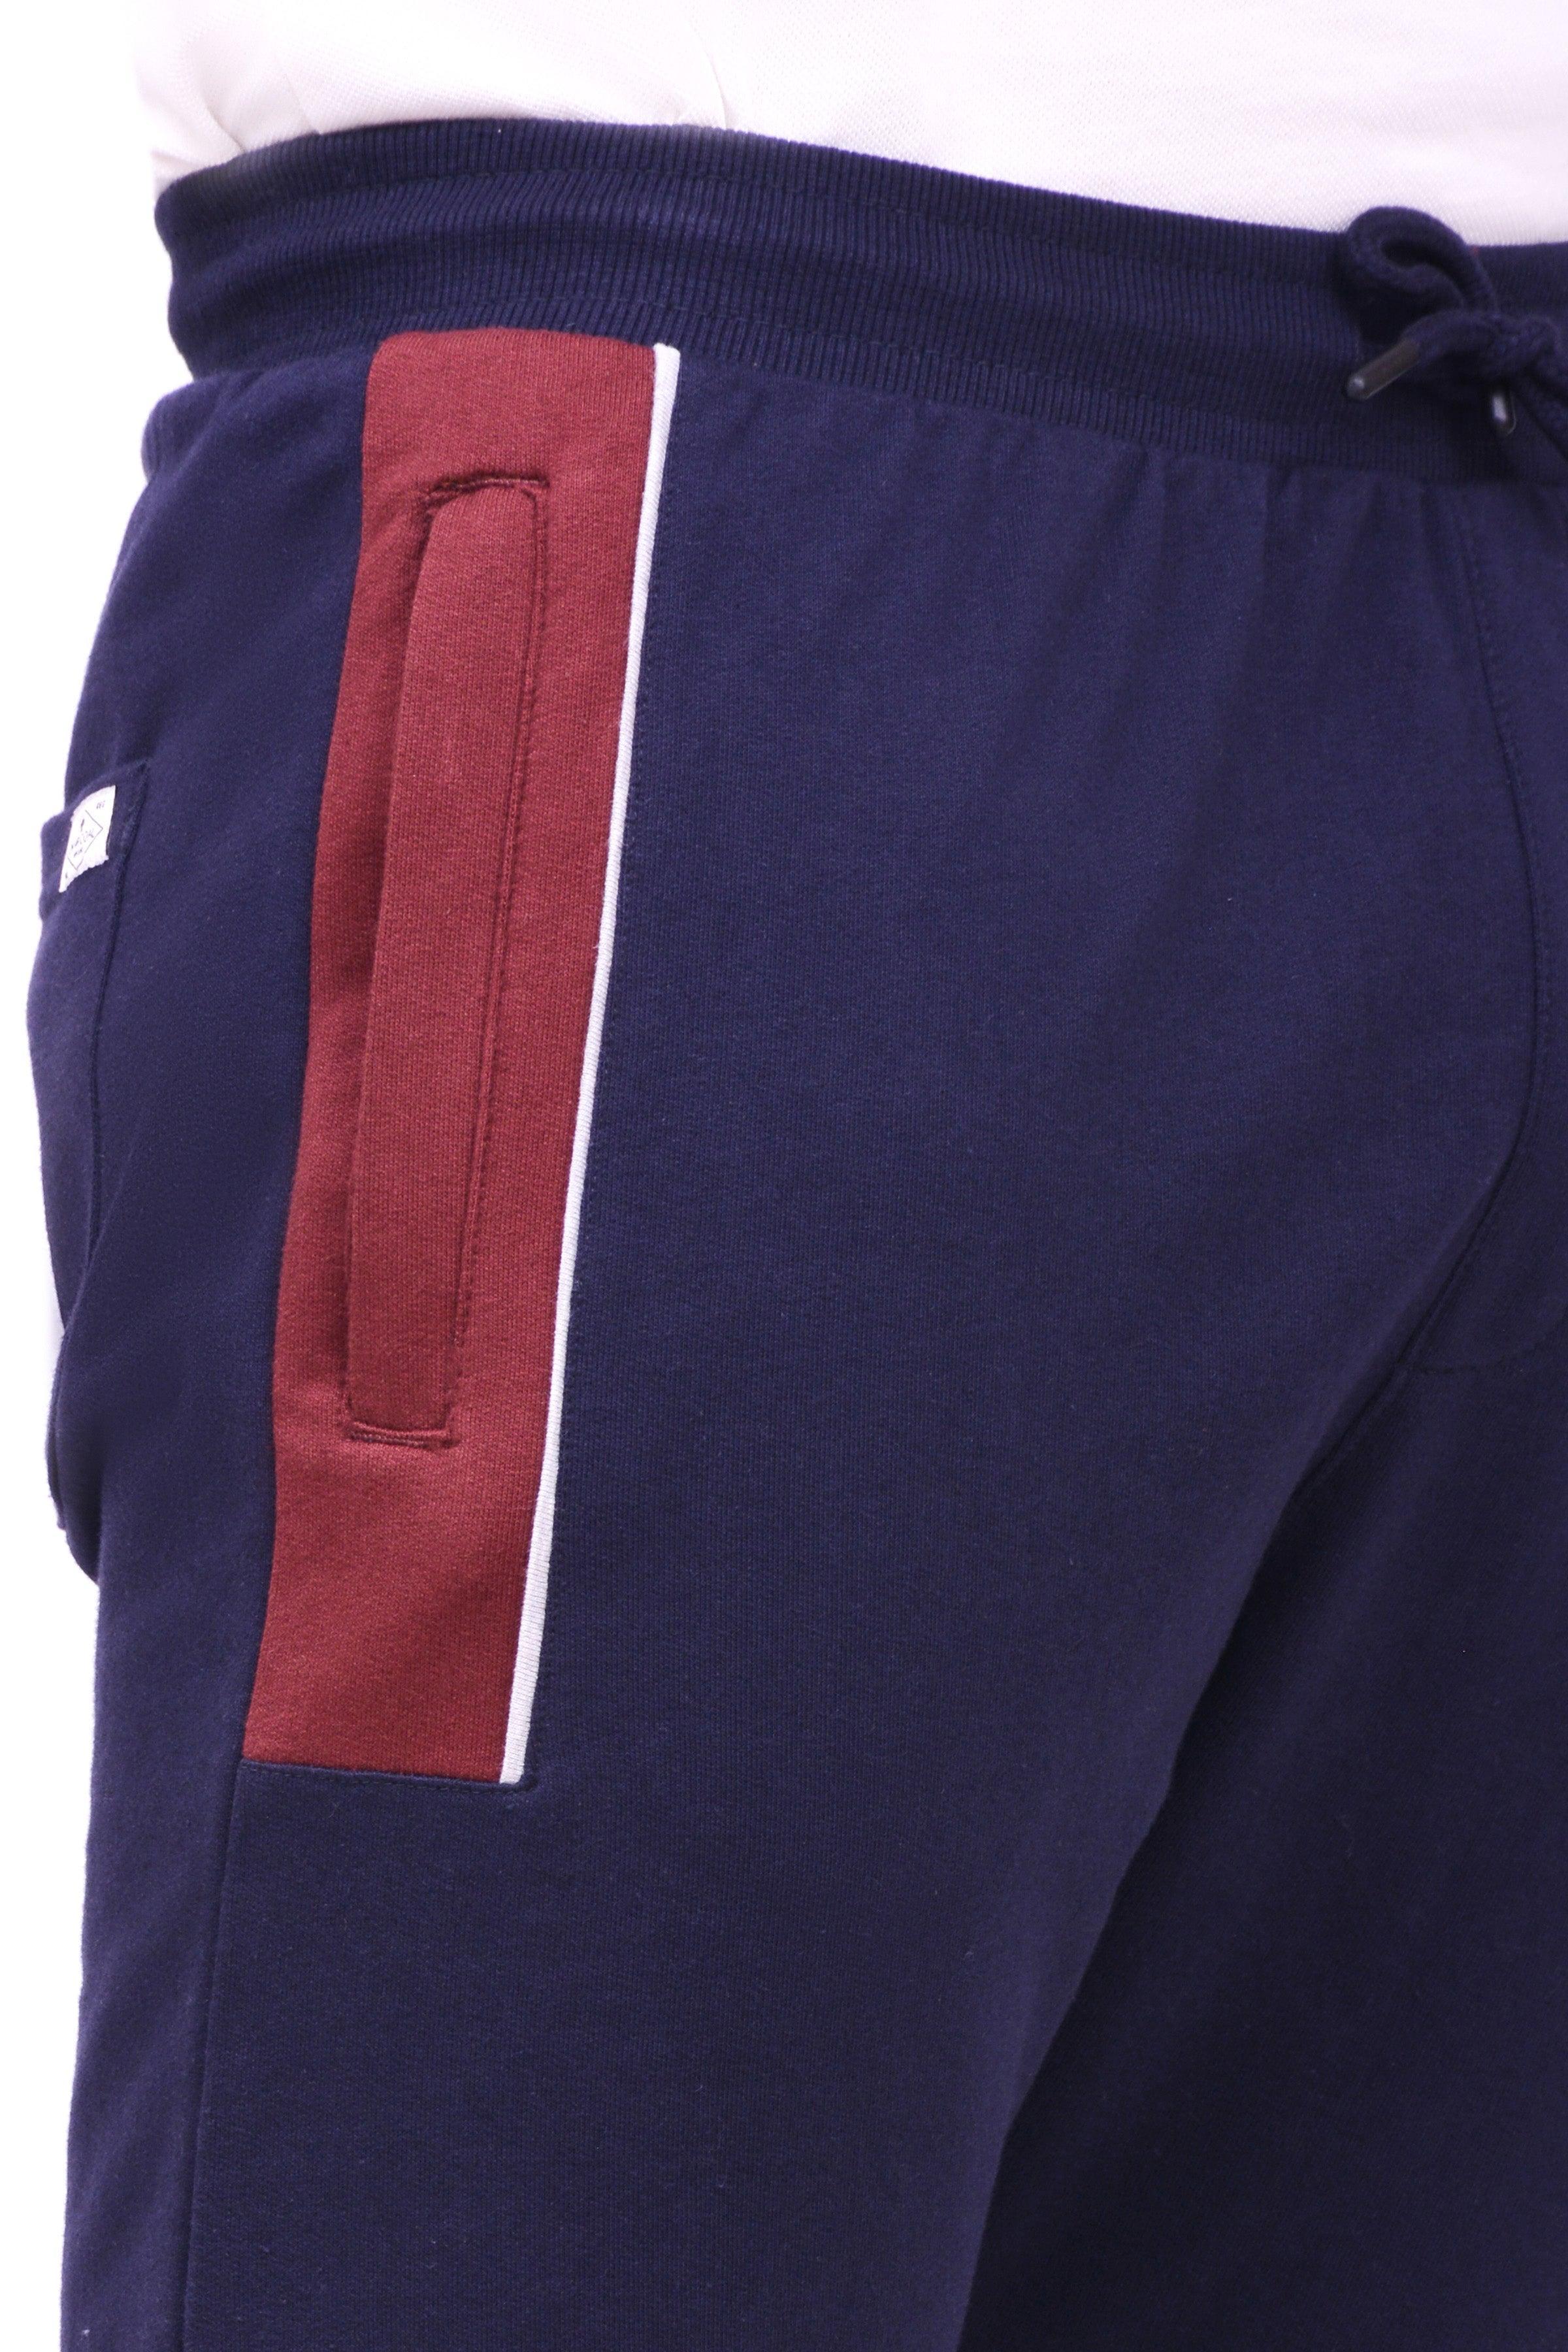 FRENCH TERRY SHORTS NAVY at Charcoal Clothing